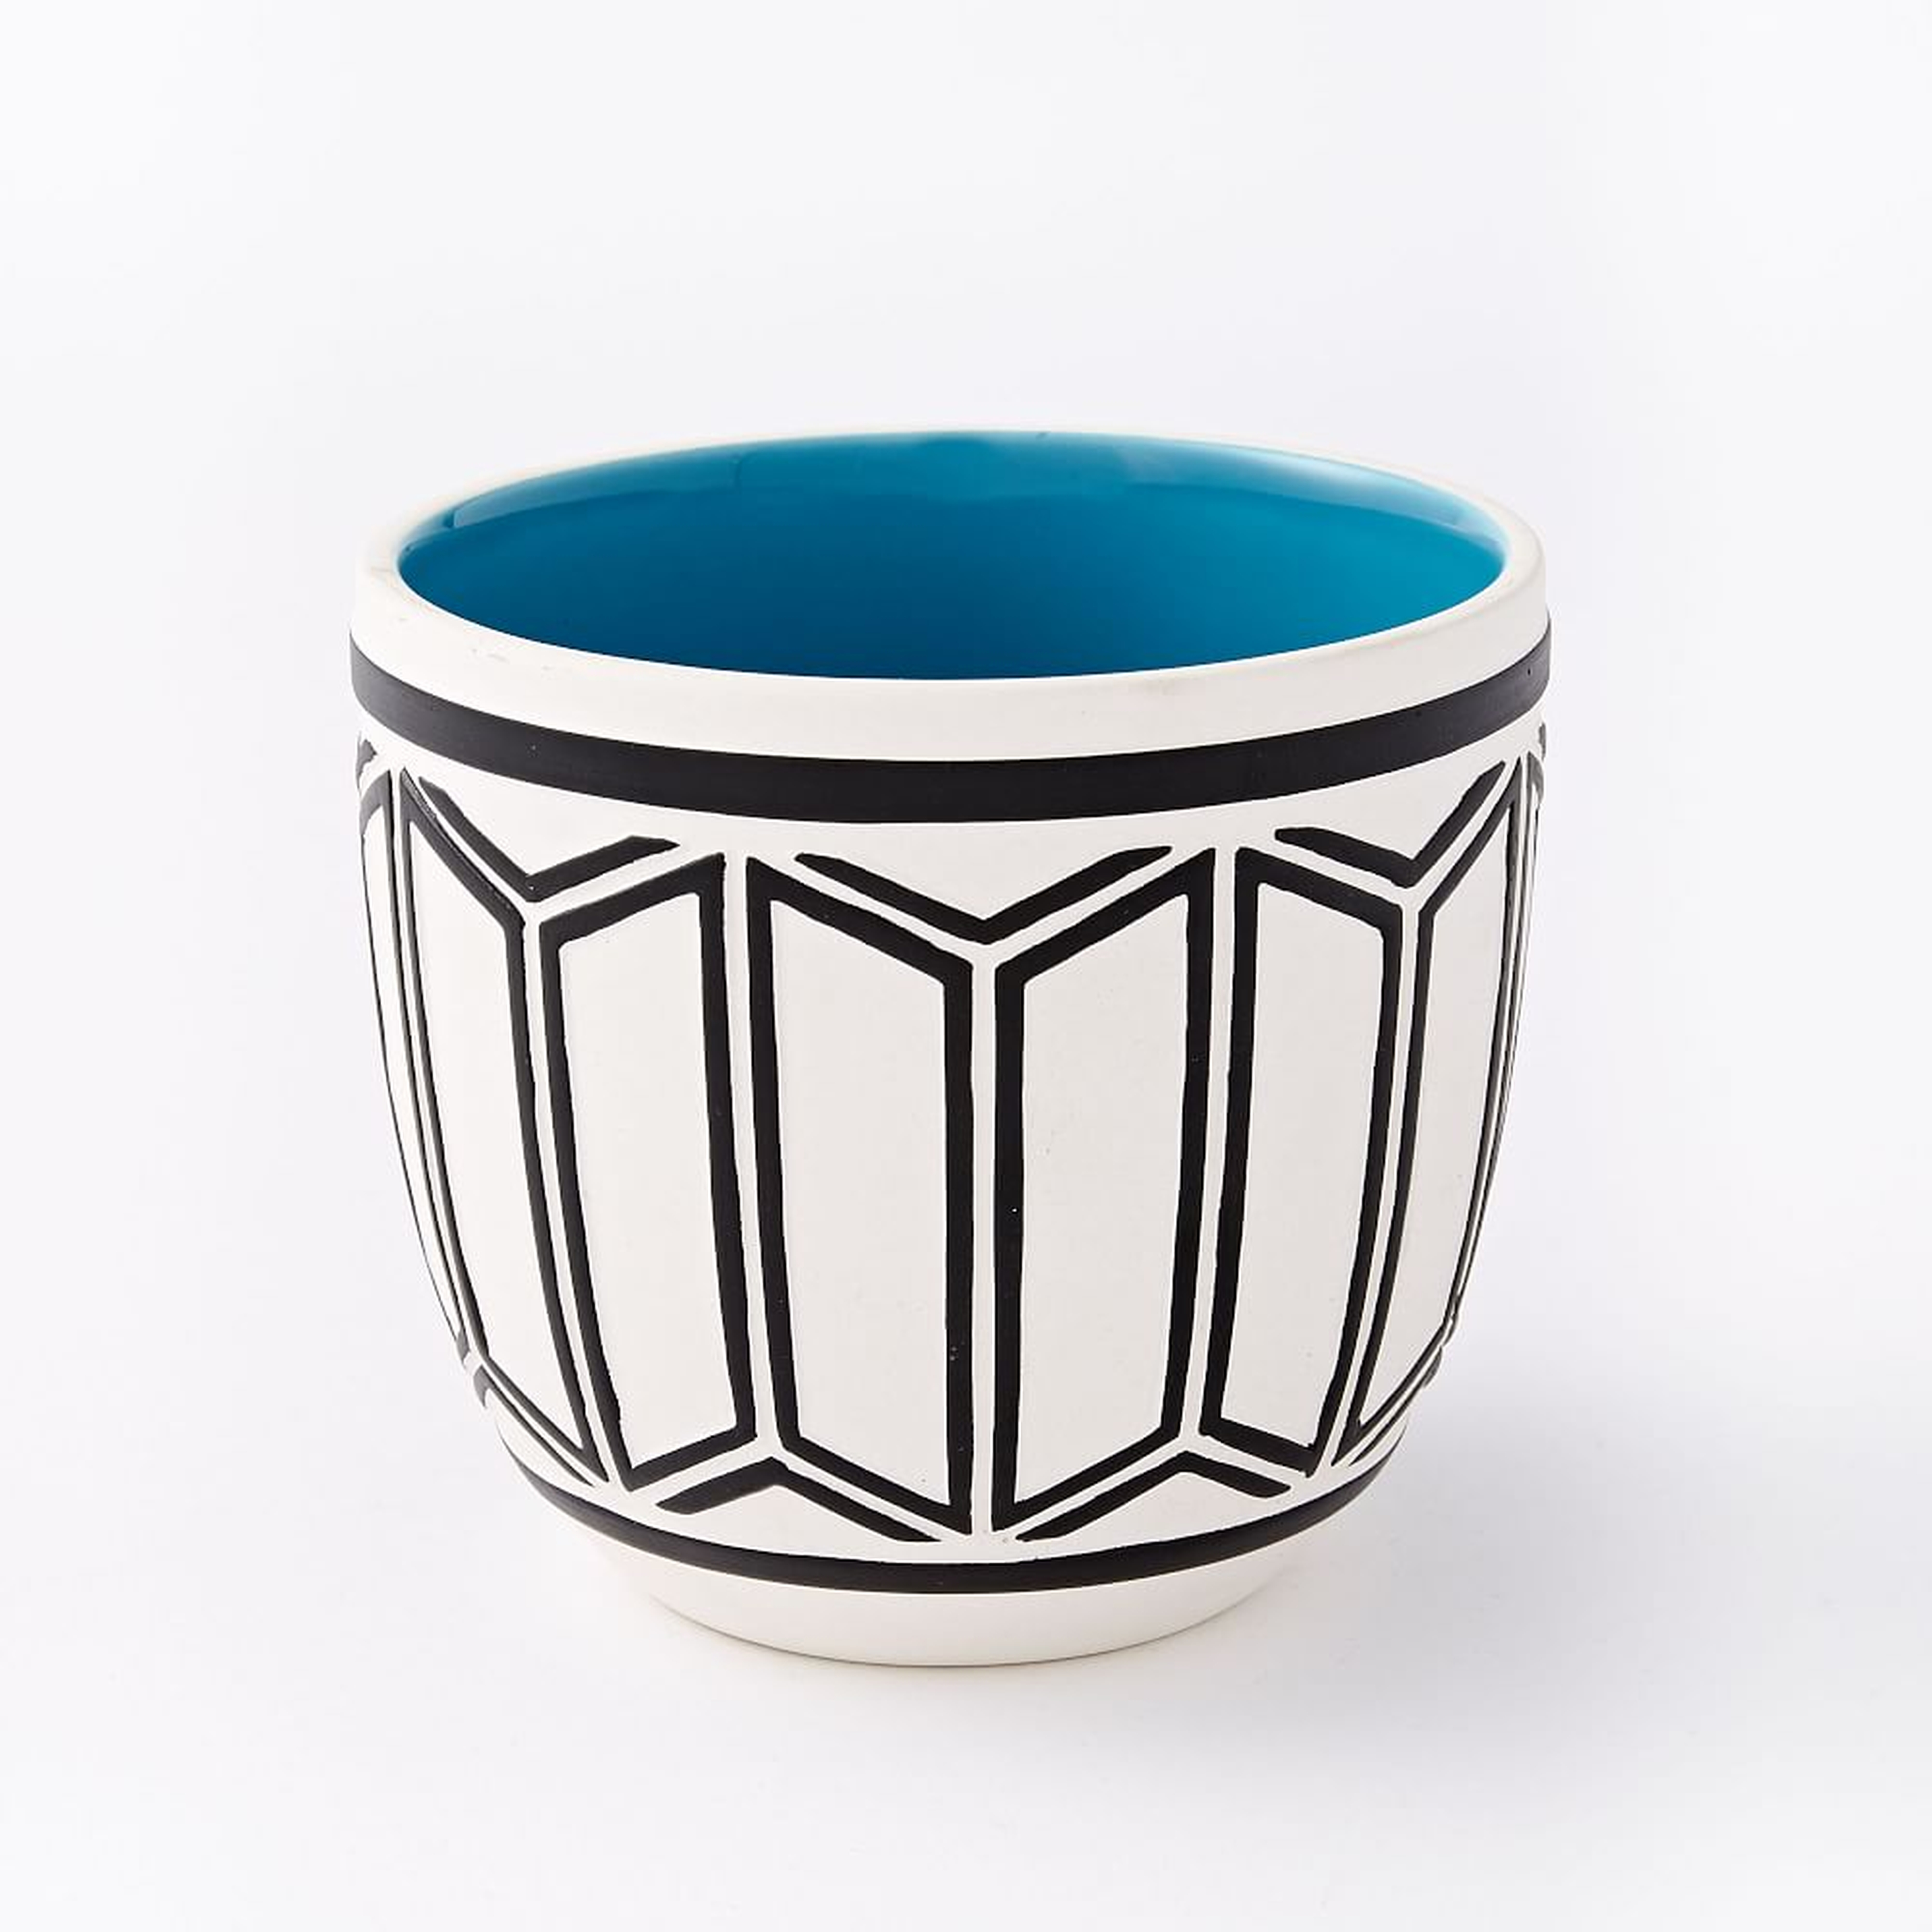 Art in the Forest Cachepot, Scallop/Teal, 4" - West Elm